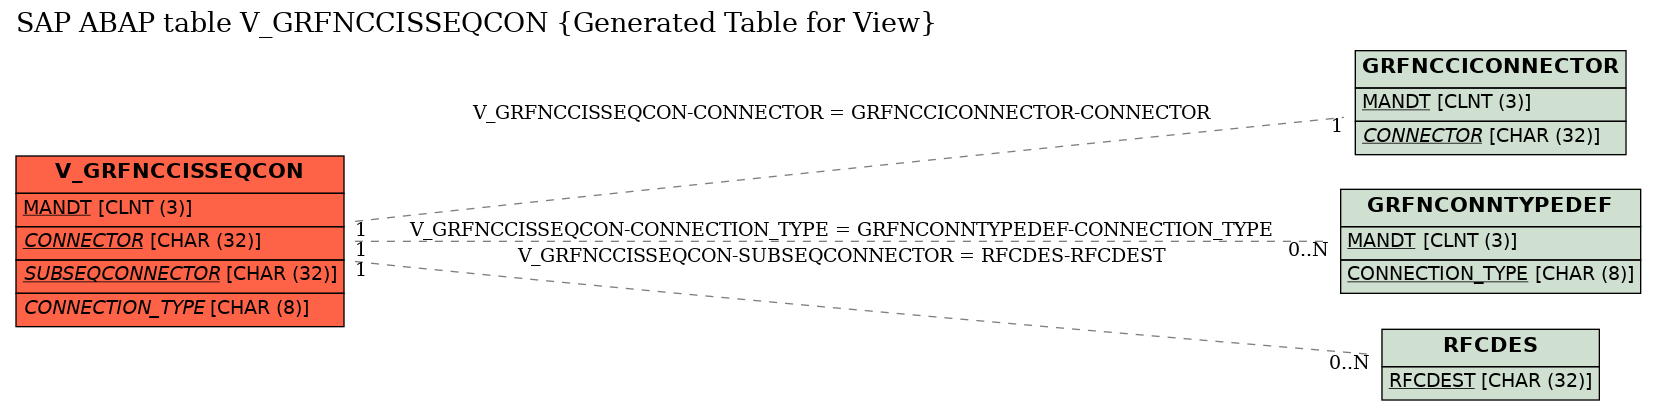 E-R Diagram for table V_GRFNCCISSEQCON (Generated Table for View)